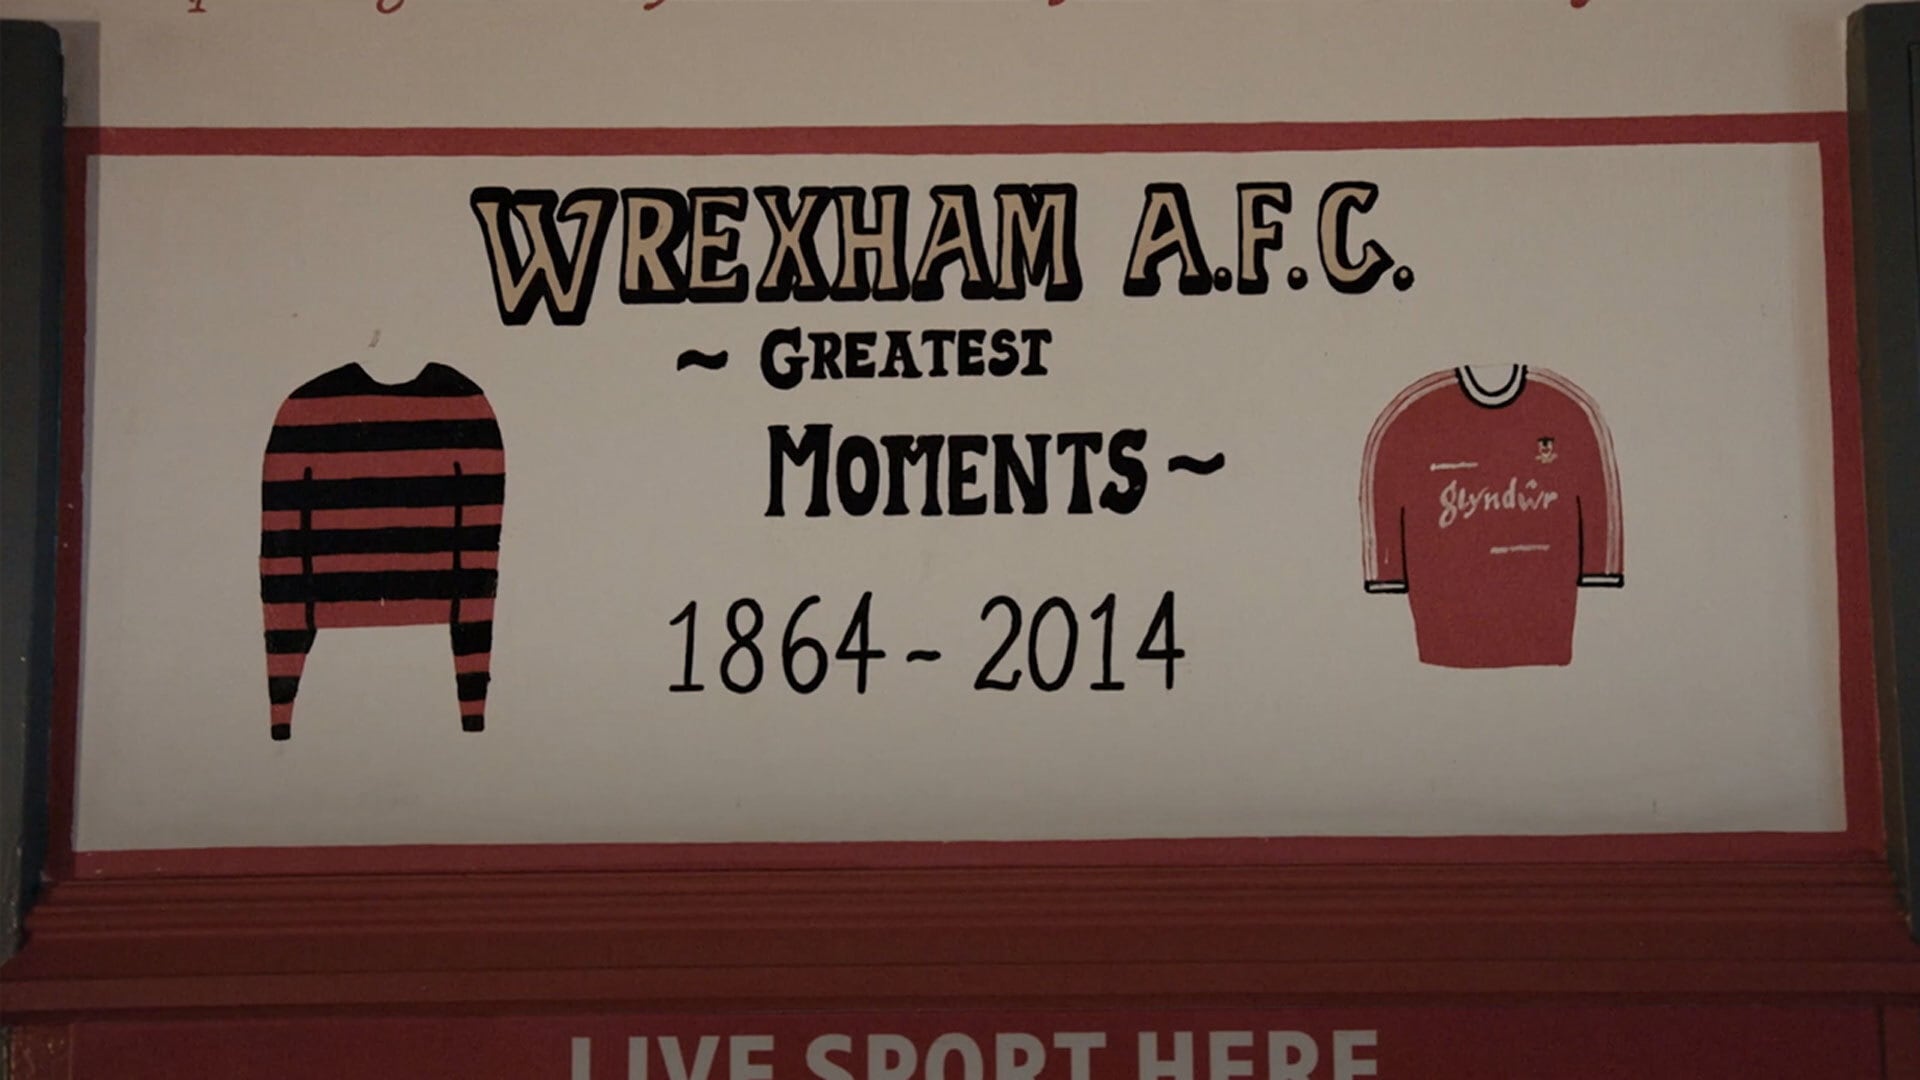 Sign saying "Wrexham AFC Great Moments 1864-2014"